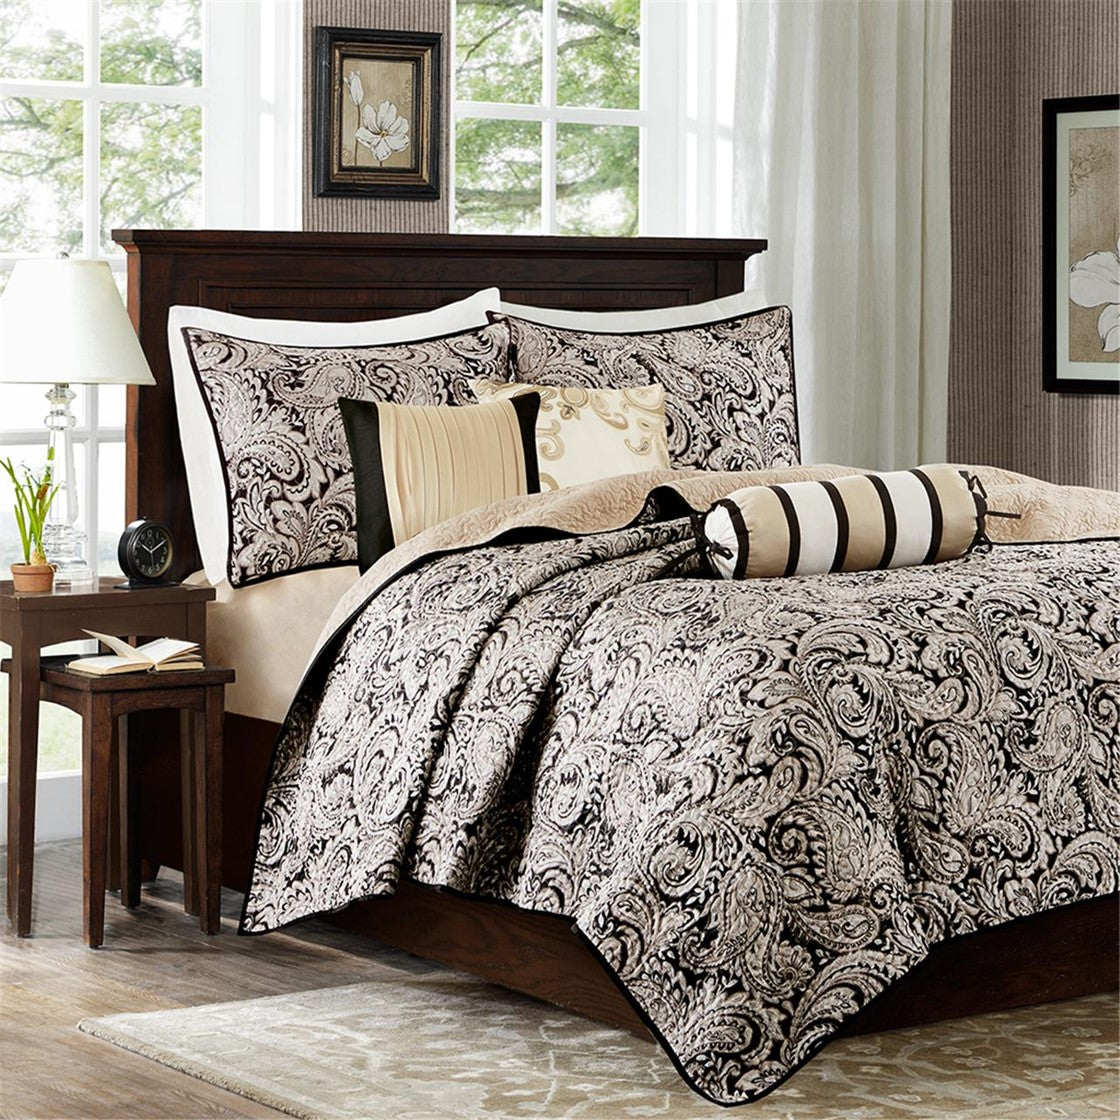 Madison Park Aubrey 6 Piece Jacquard Quilt Set with Throw Pillows - Black - Full Size / Queen Size